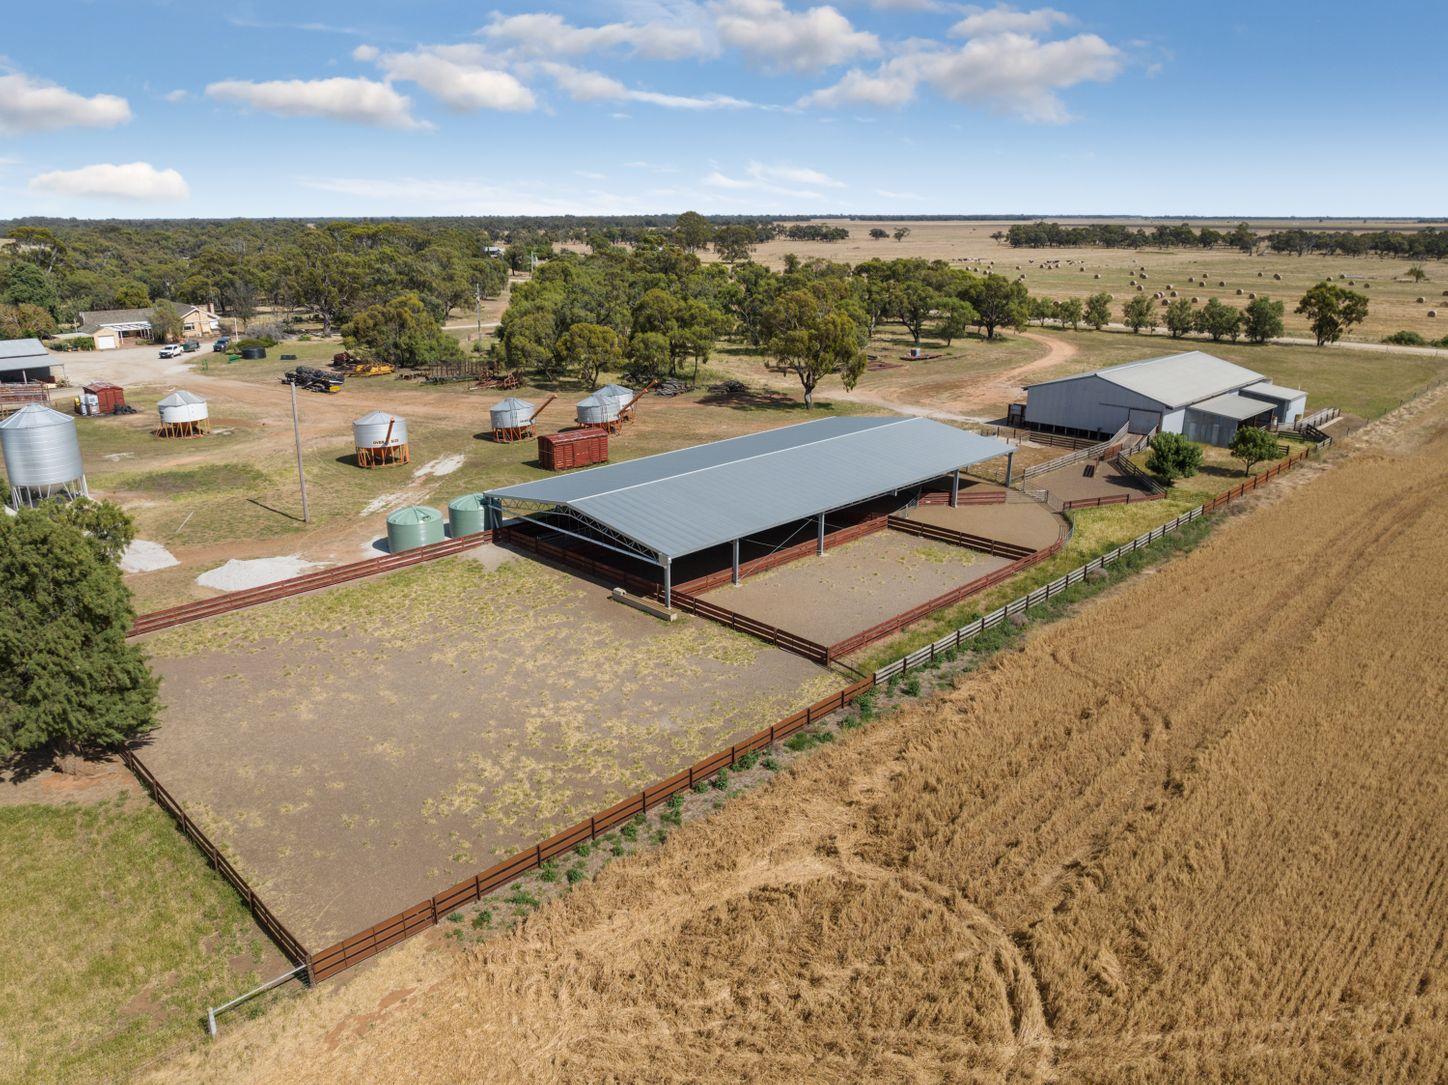 Rural Property For Sale VIC